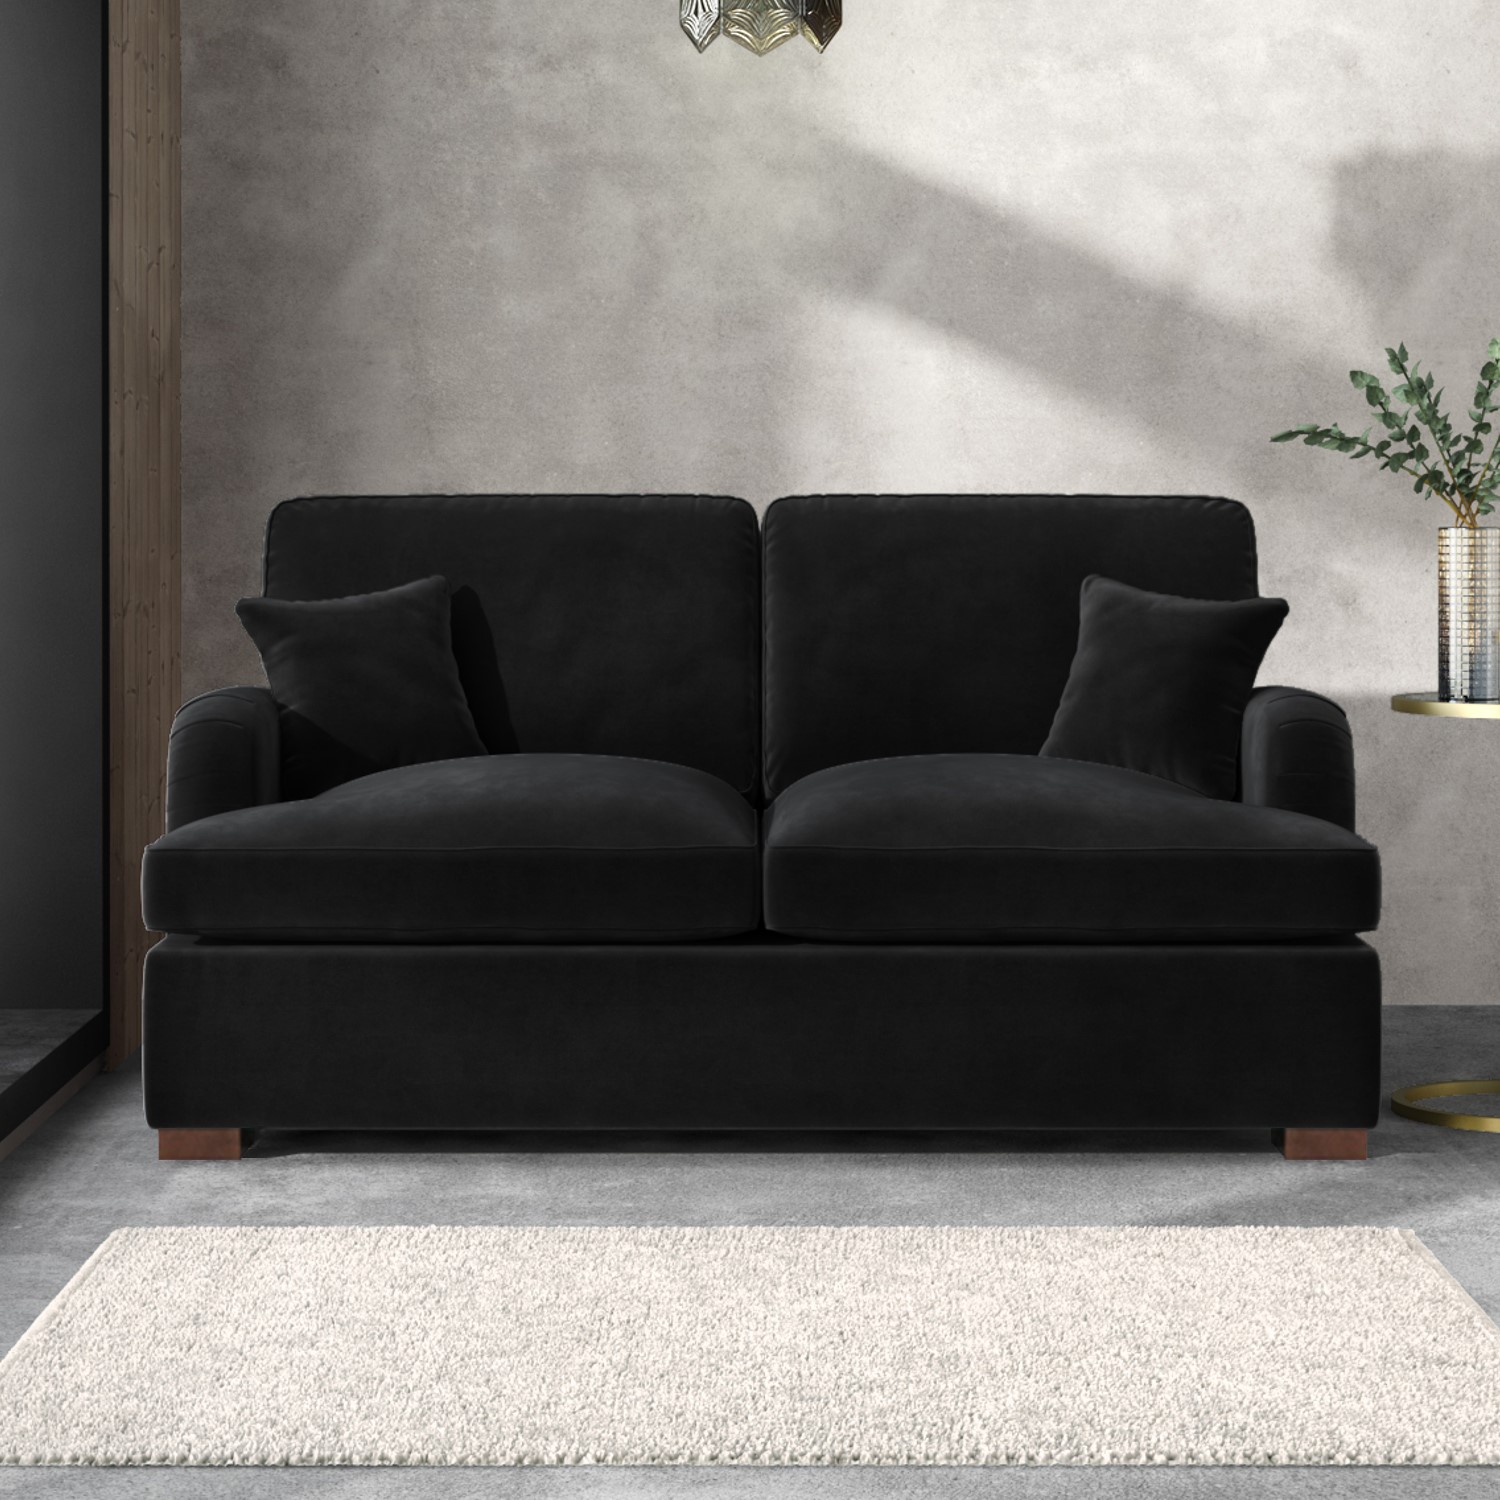 Read more about Black velvet pull out sofa bed seats 2 payton